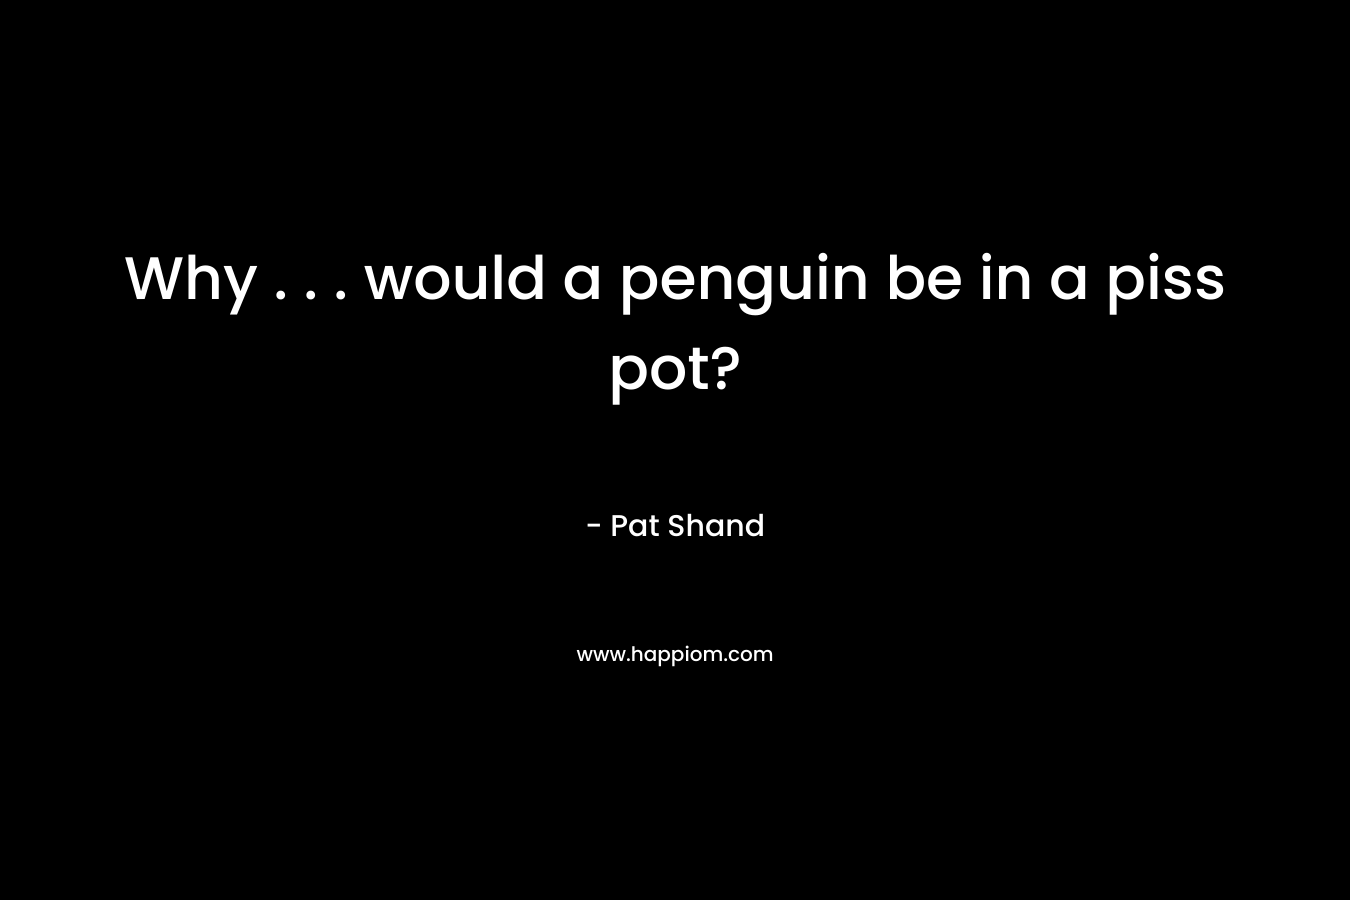 Why . . . would a penguin be in a piss pot? – Pat Shand